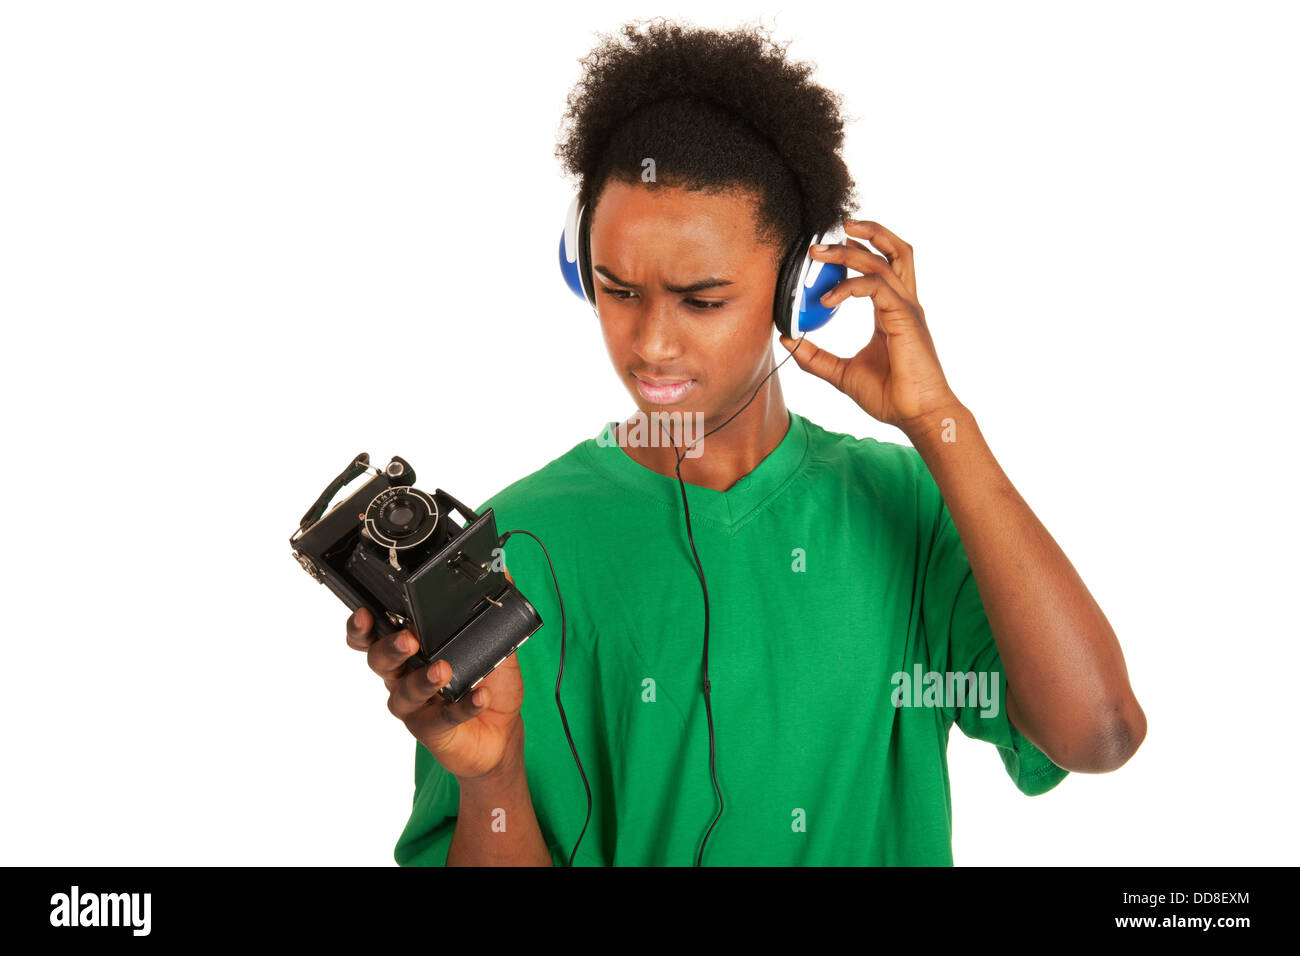 Teenager boy connecting with vintage photo camera Stock Photo